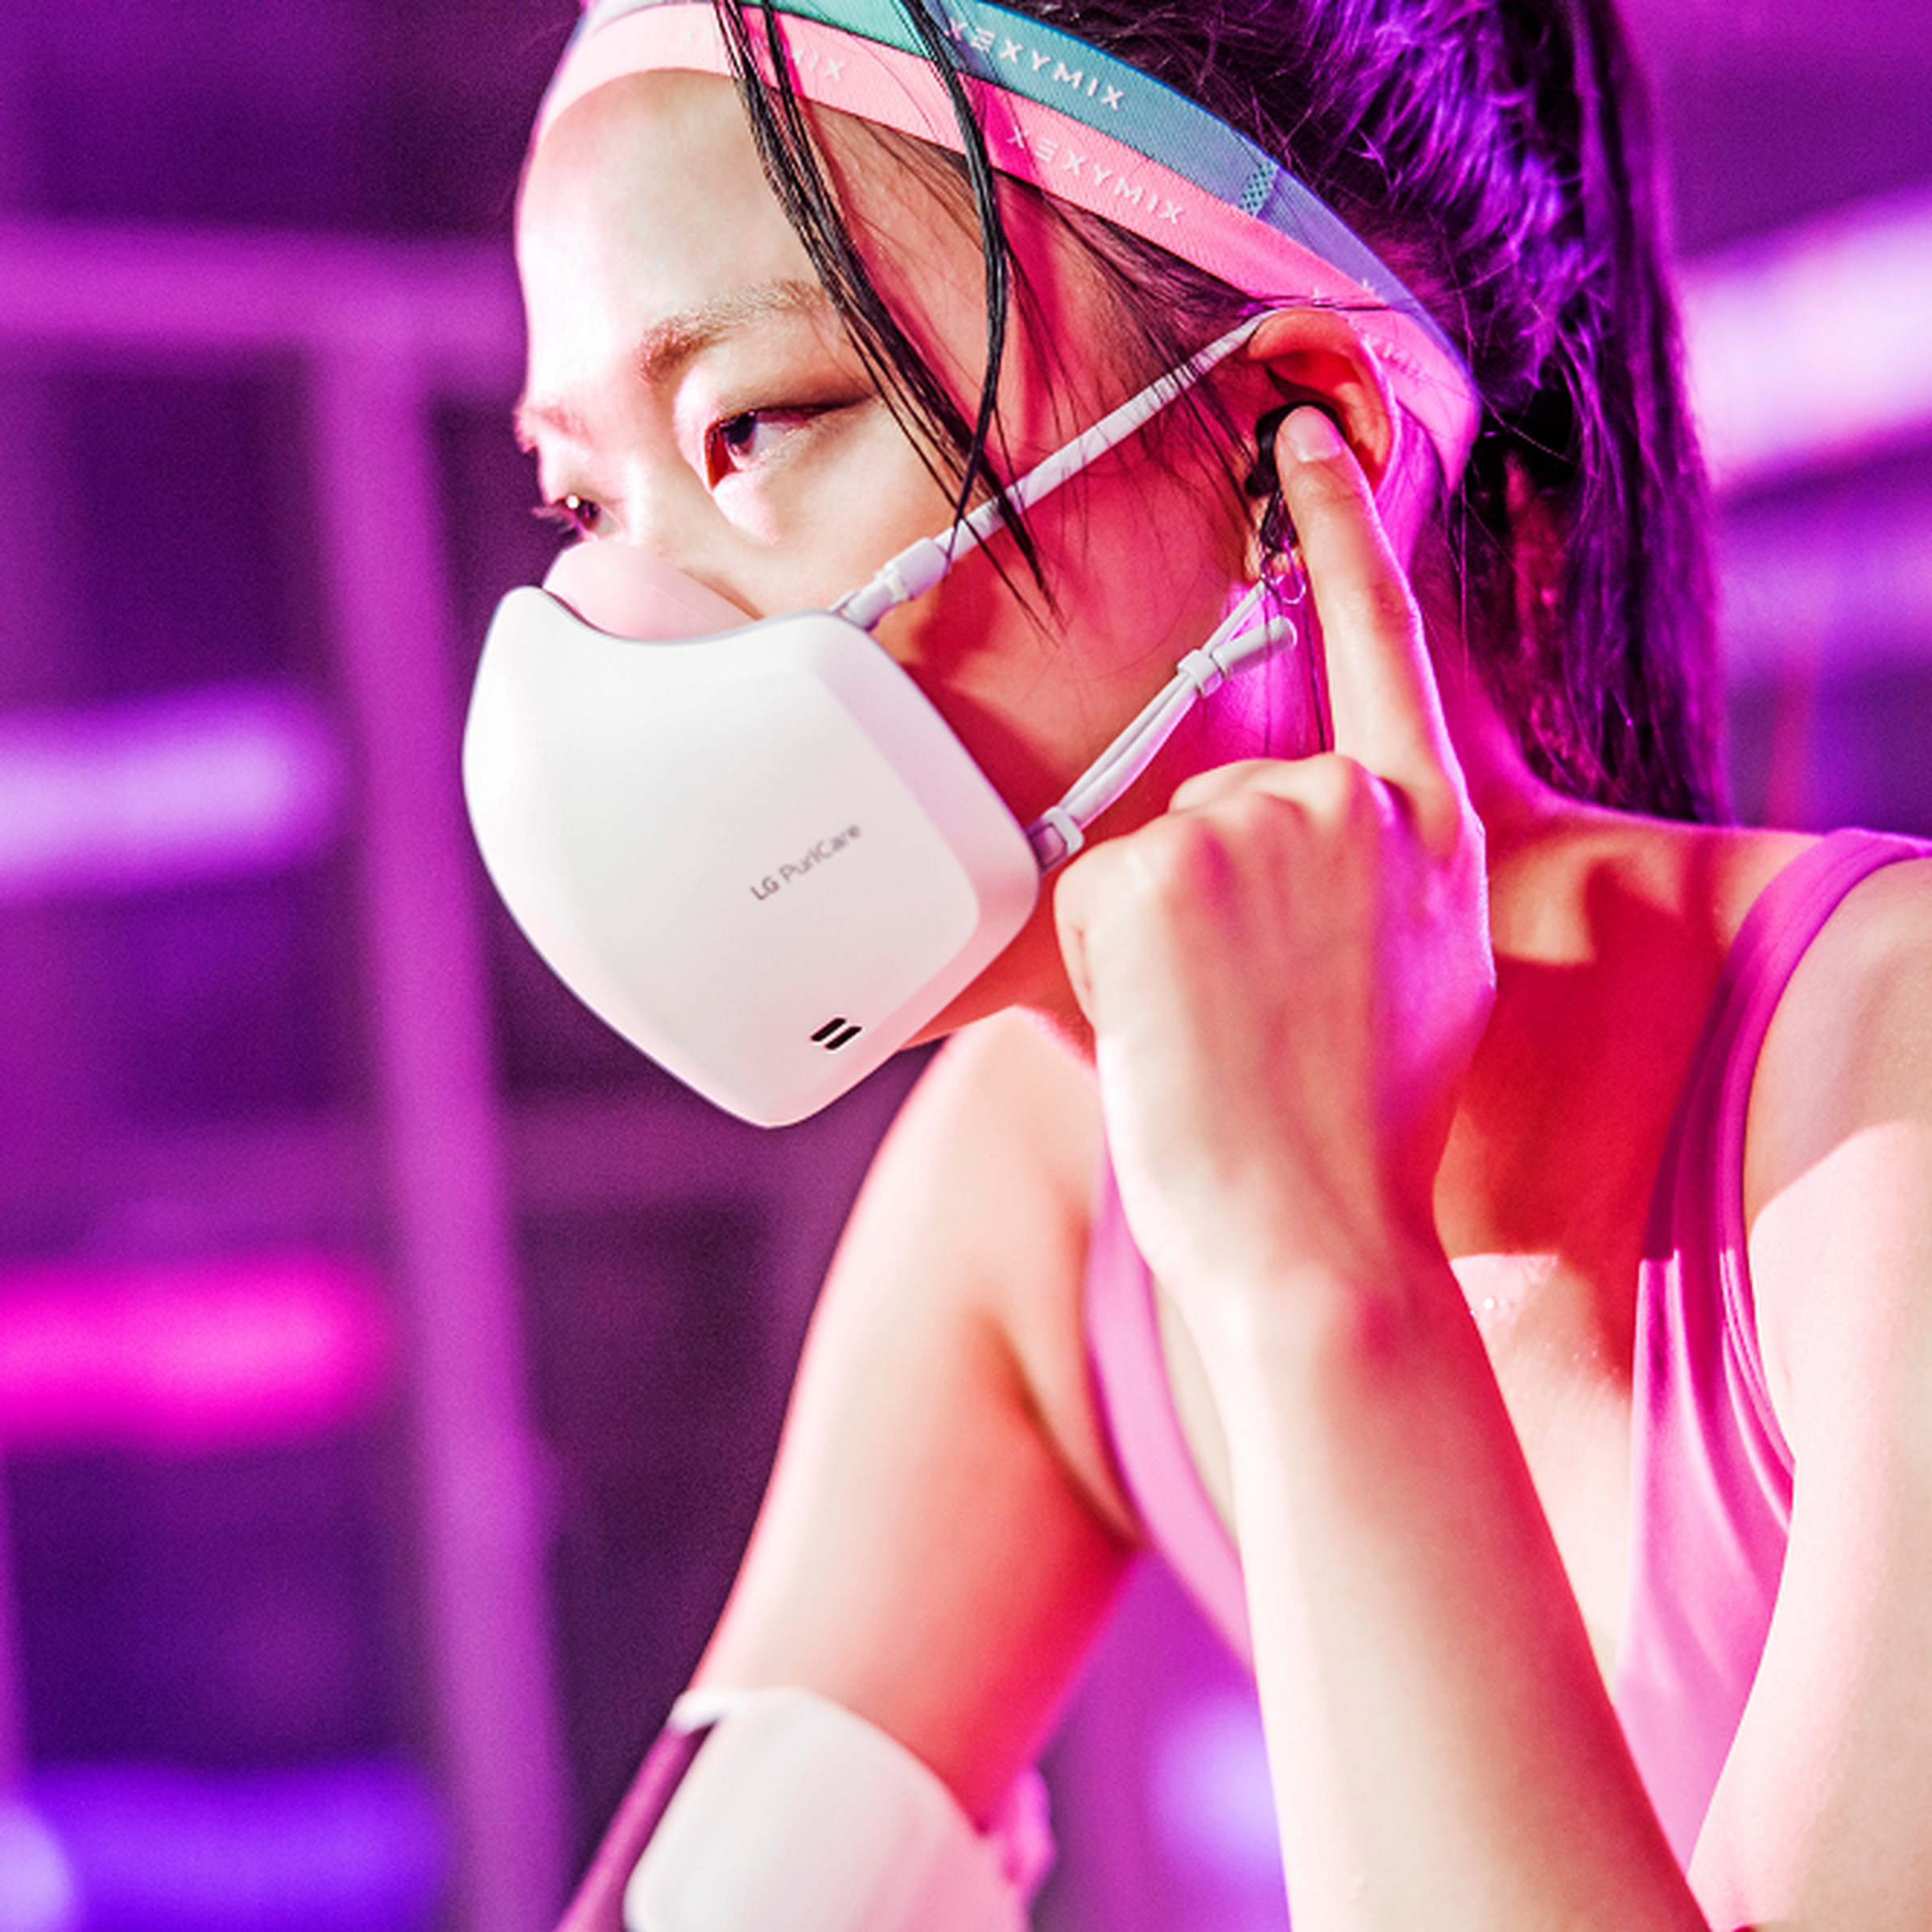 LG claims the battery-powered, air-filtering mask is comfortable to wear for up to eight hours at a time.